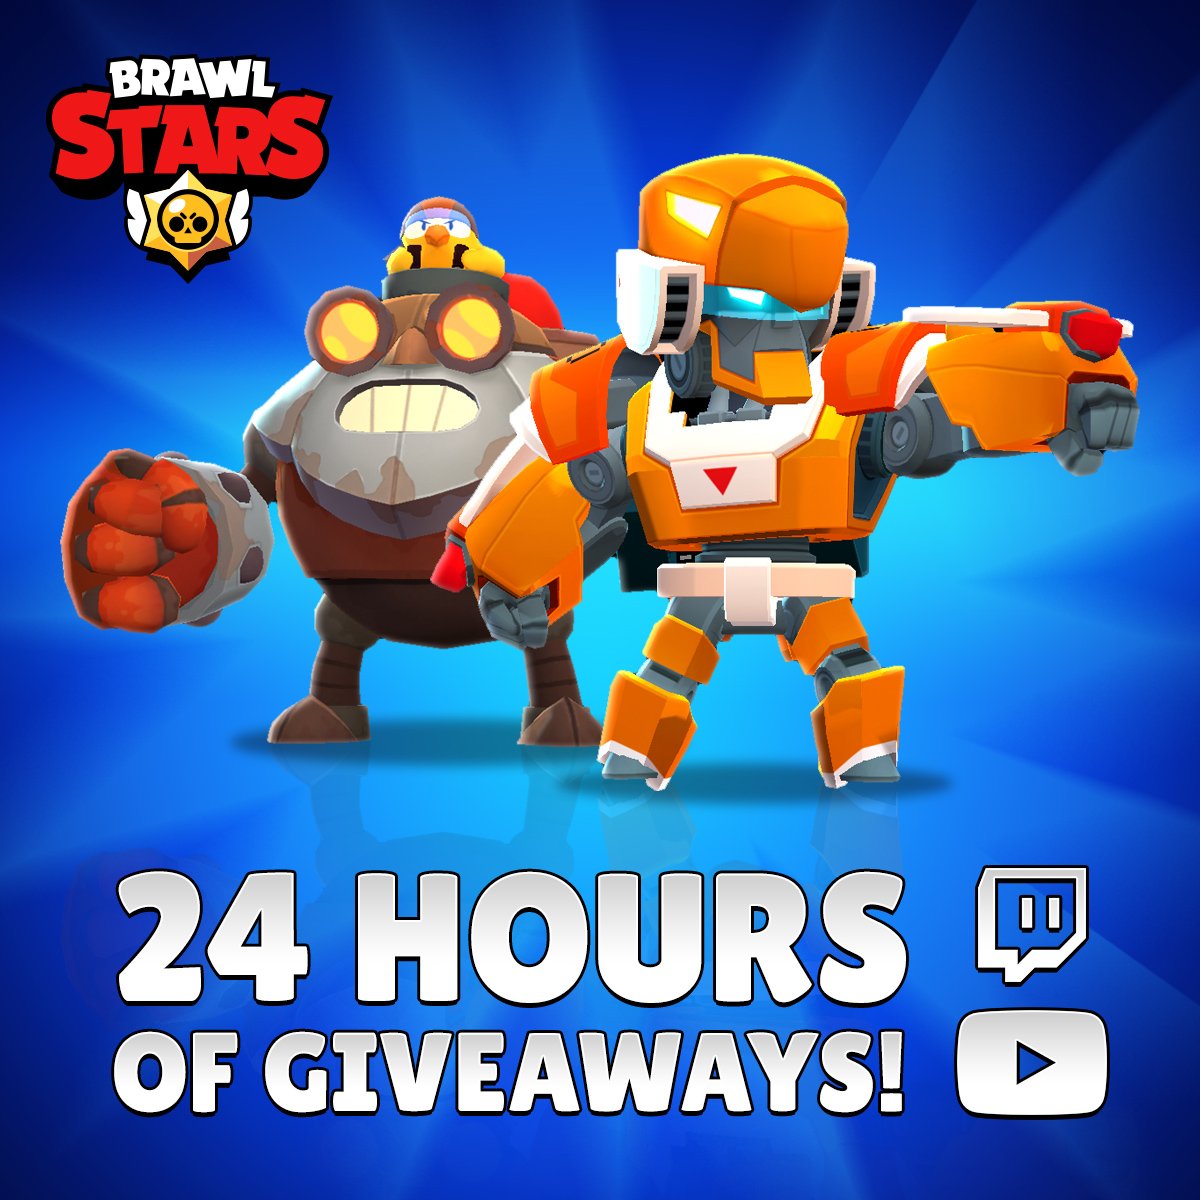 Brawl Stars Sur Twitter Retweet For A Chance To Winbrawlskins But If You Don T Get Lucky Don T Worry This Sunday July 14th More Than 30 Streamers Will Be Hosting Giveaways - erreur 913 brawl stars mise a jour